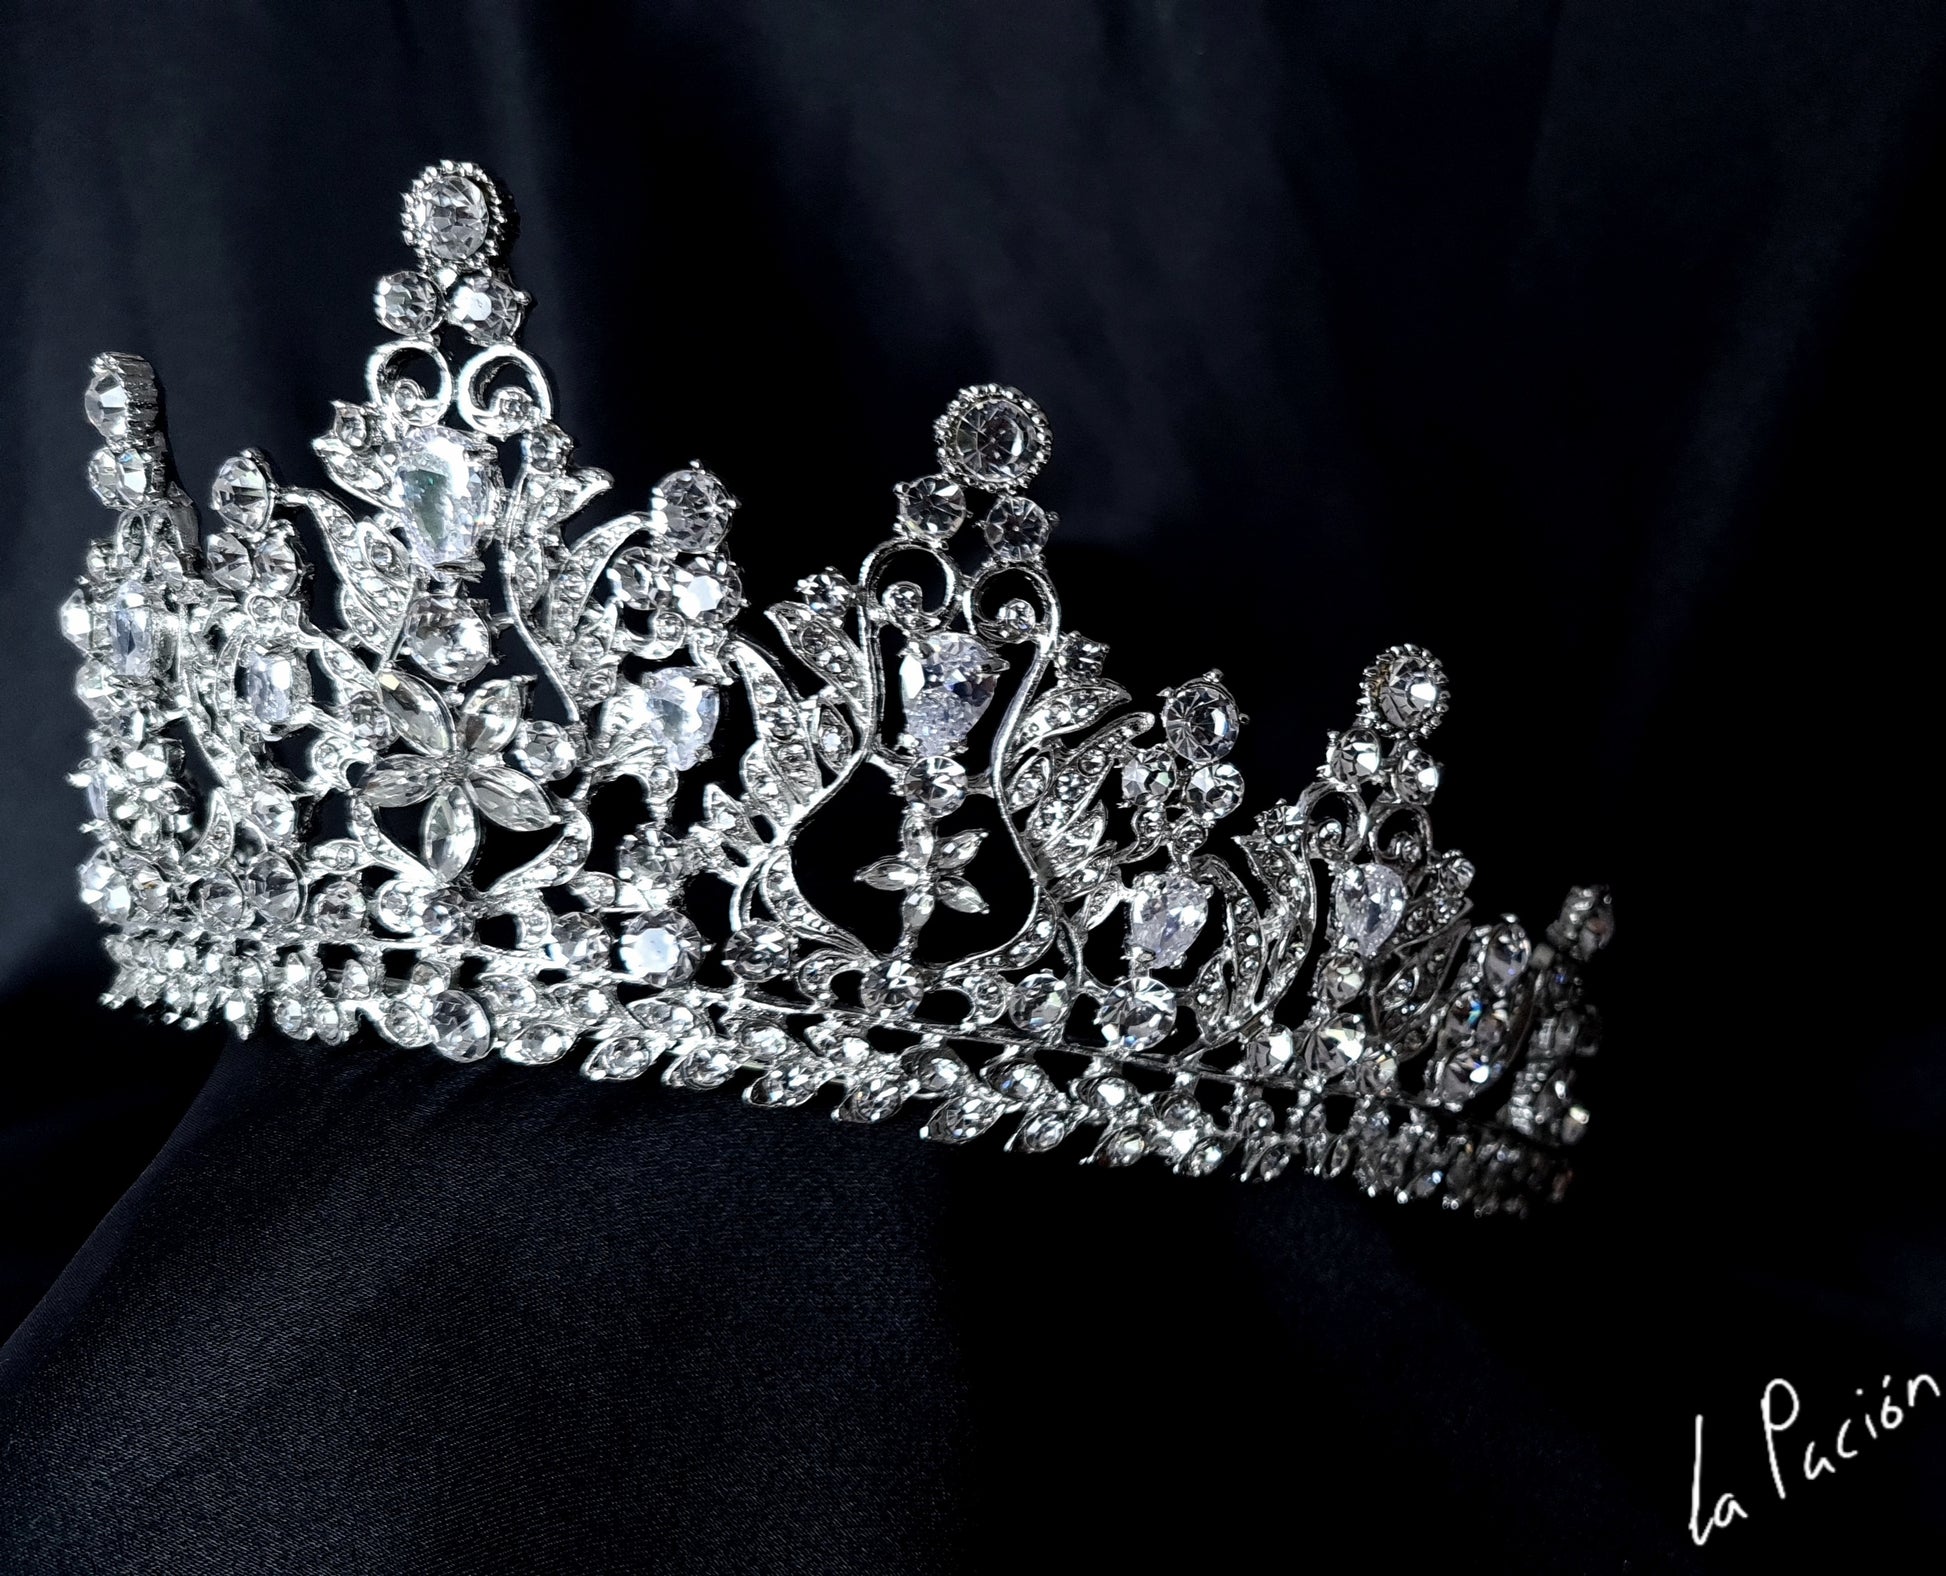 a tiara sitting on top of a black cloth. The tiara is silver in color and has a flower design. The rhinestones are clear and sparkling.